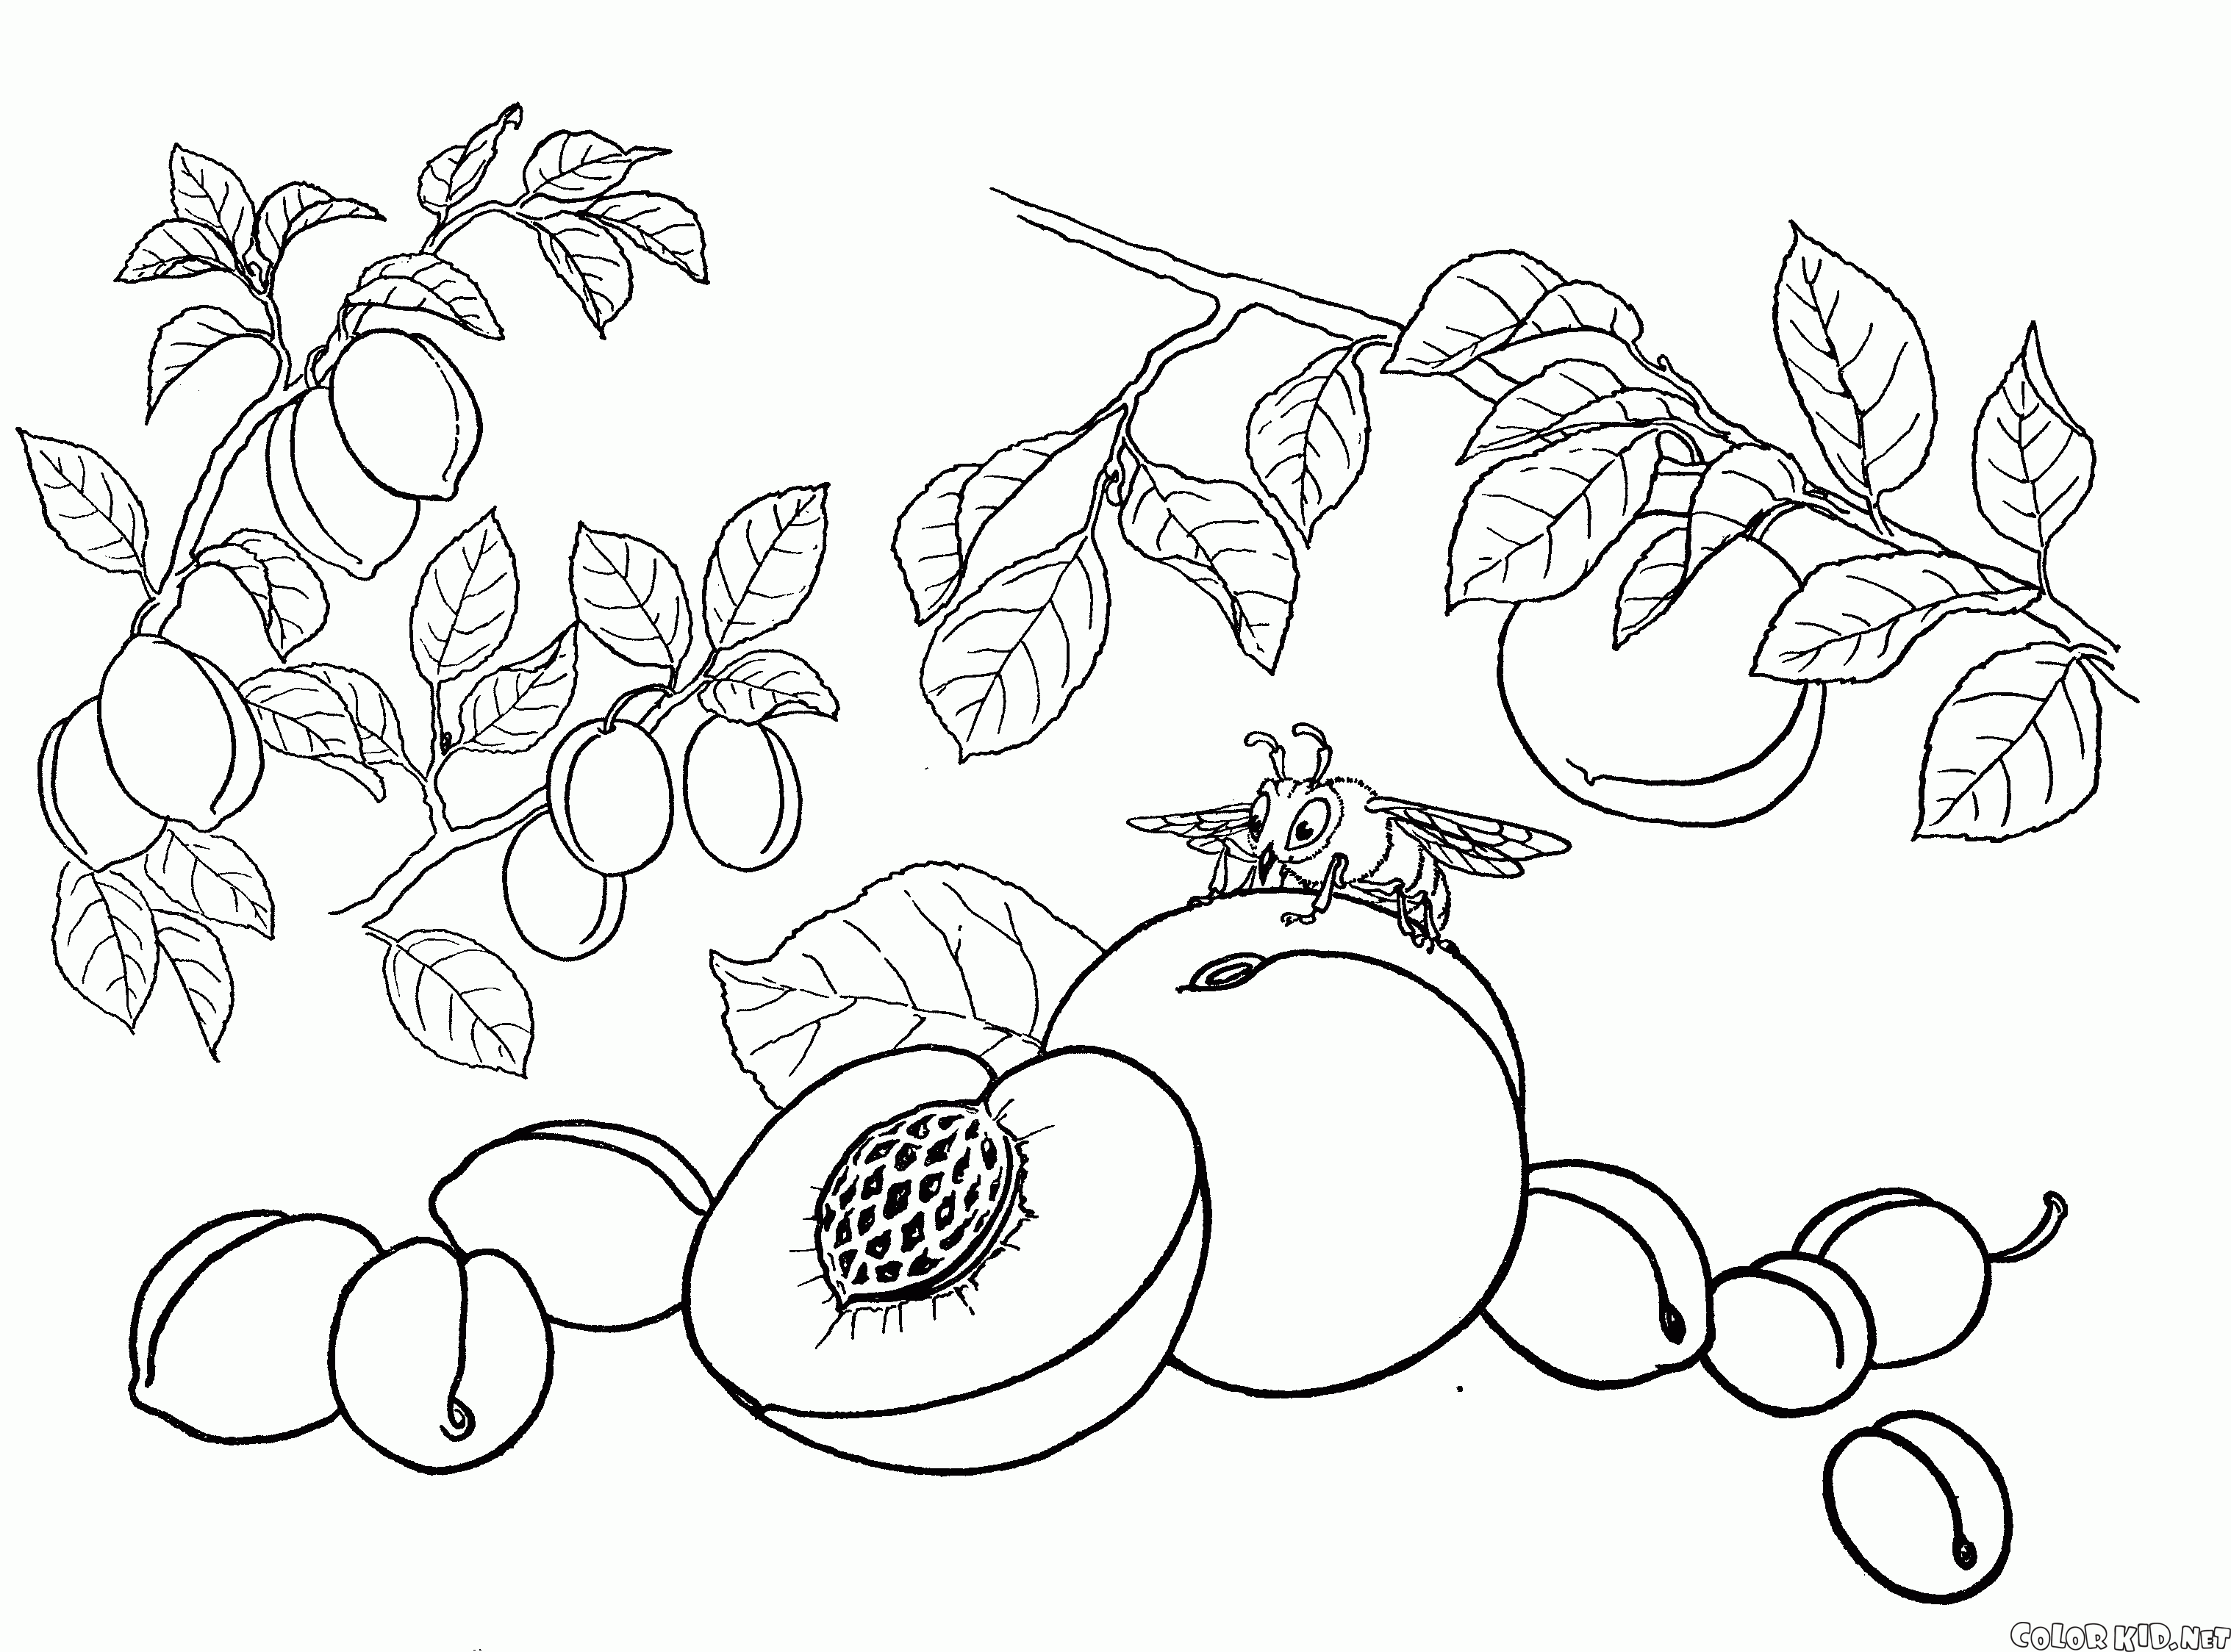 Coloring page - Peach, apricot, plum